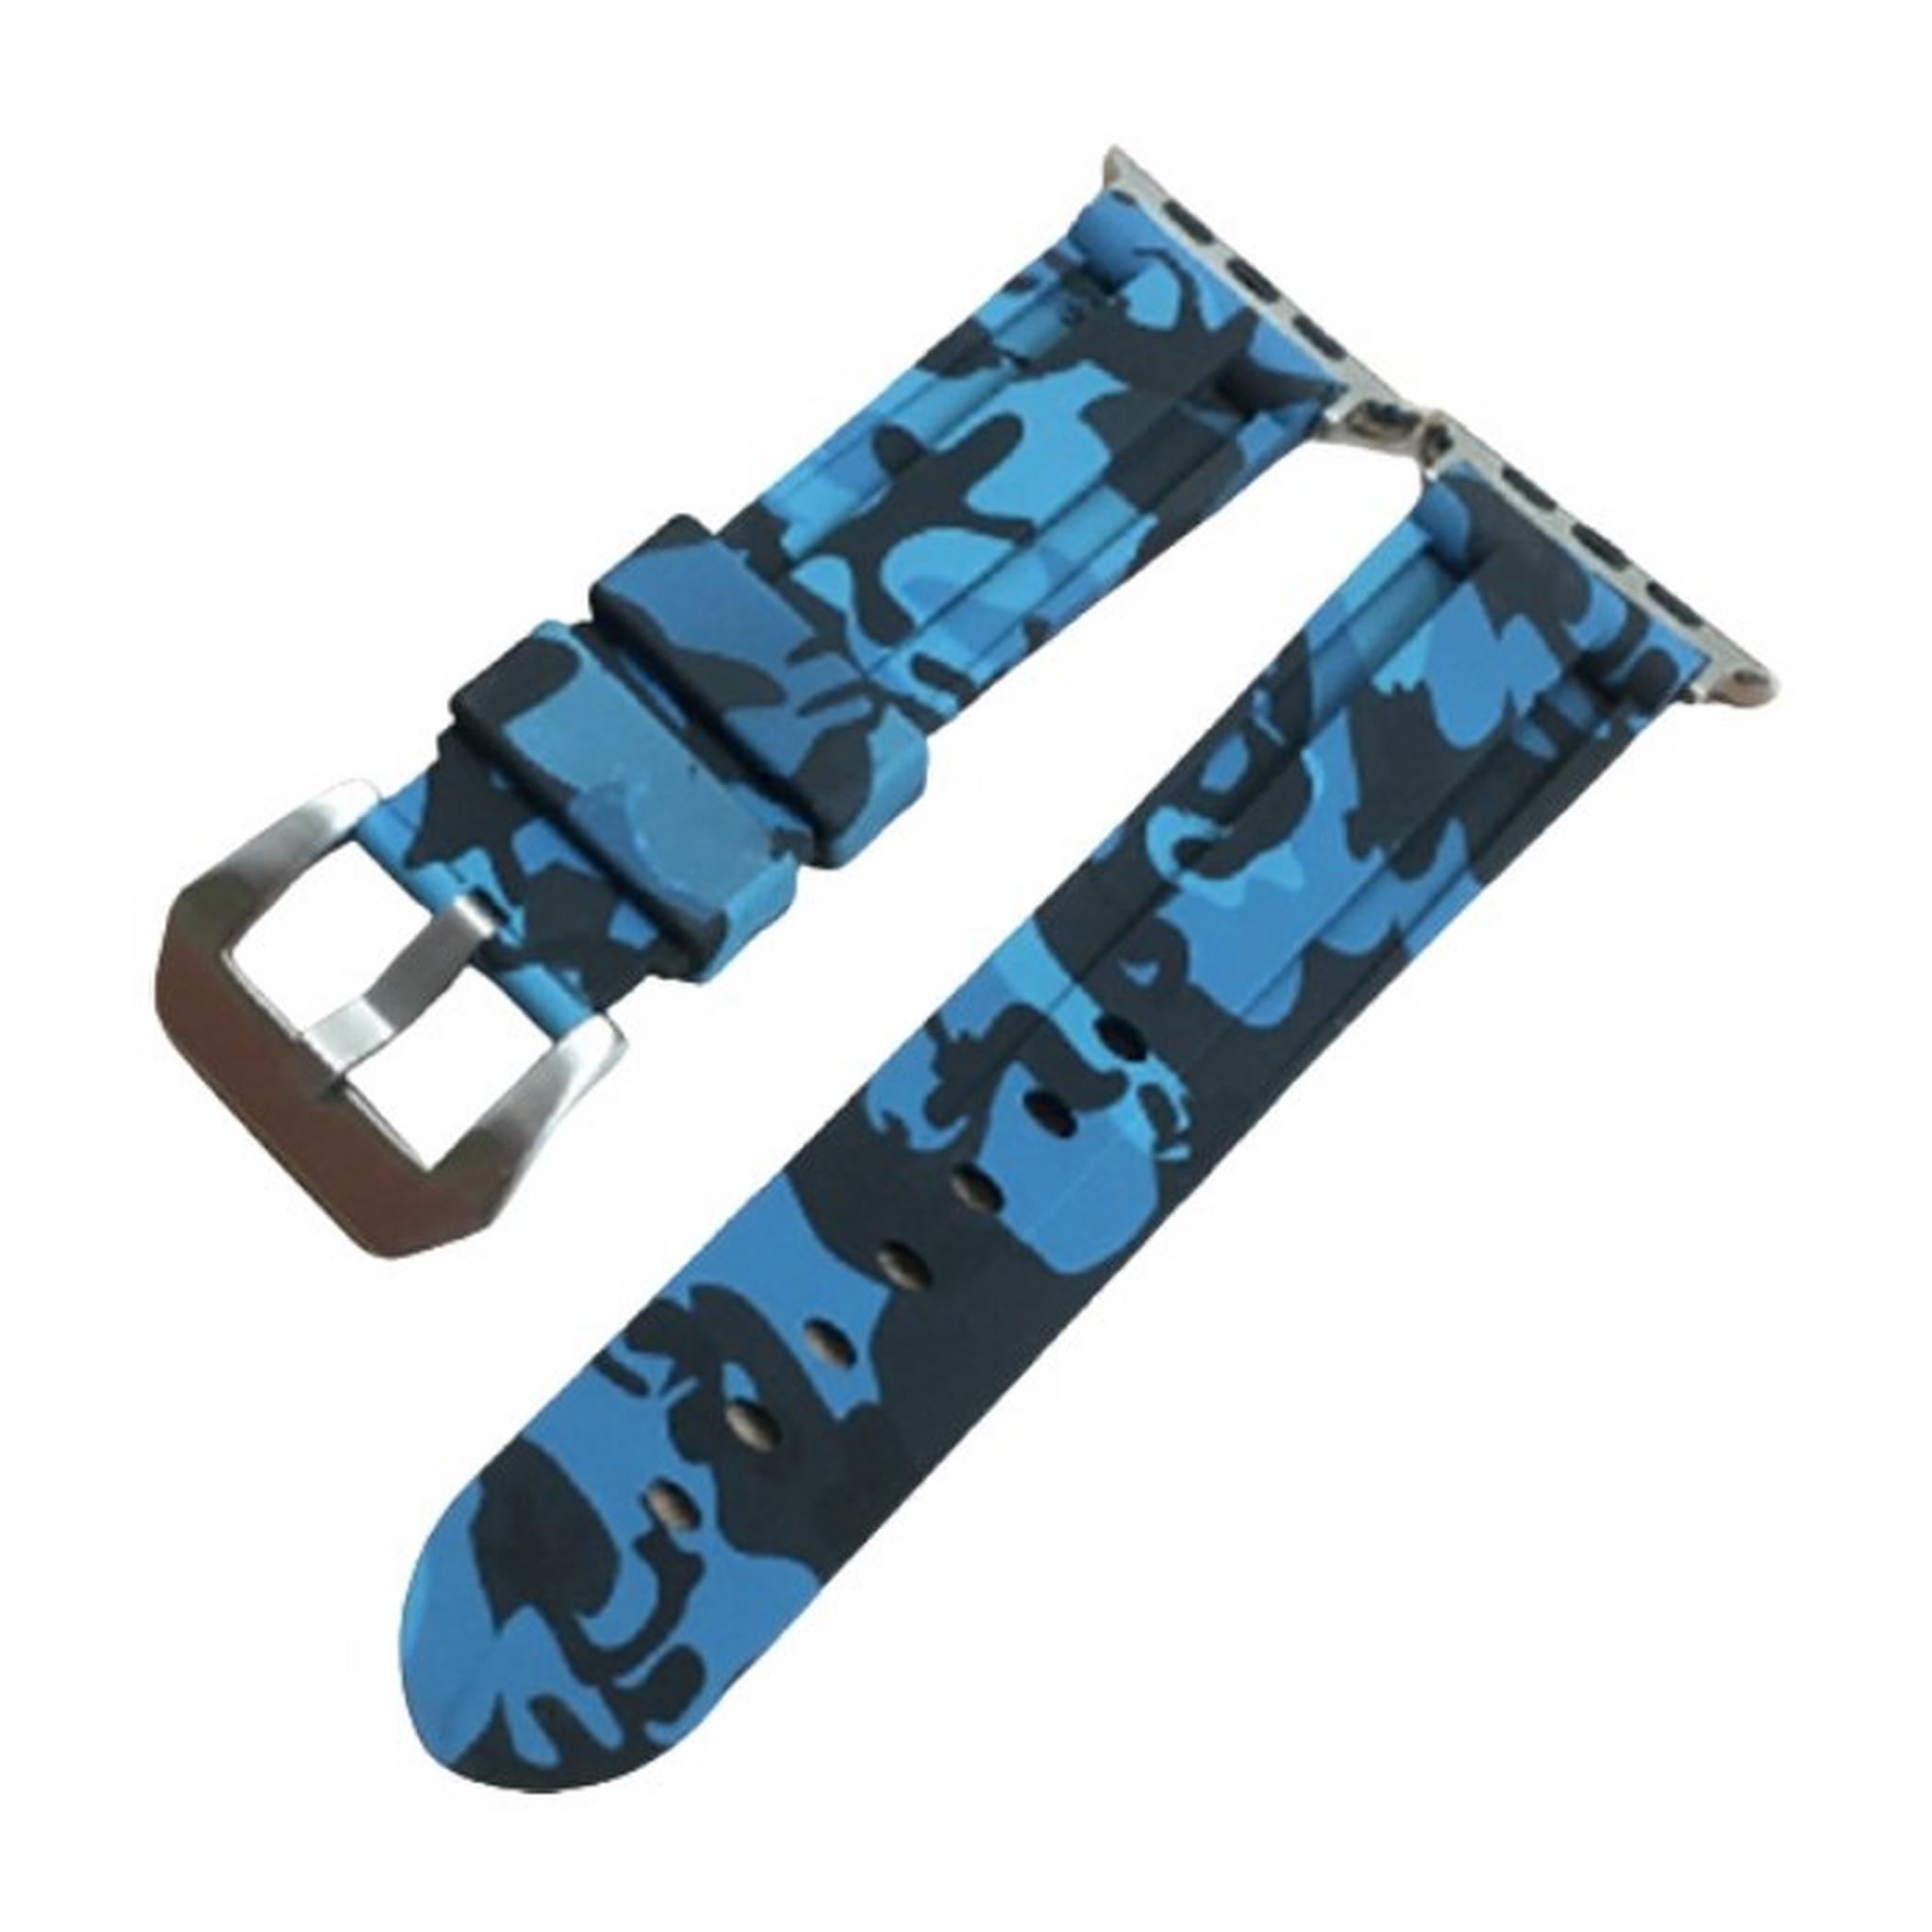 EQ Apple Watch Band Size 38/40MM (Camouflage) - Blue